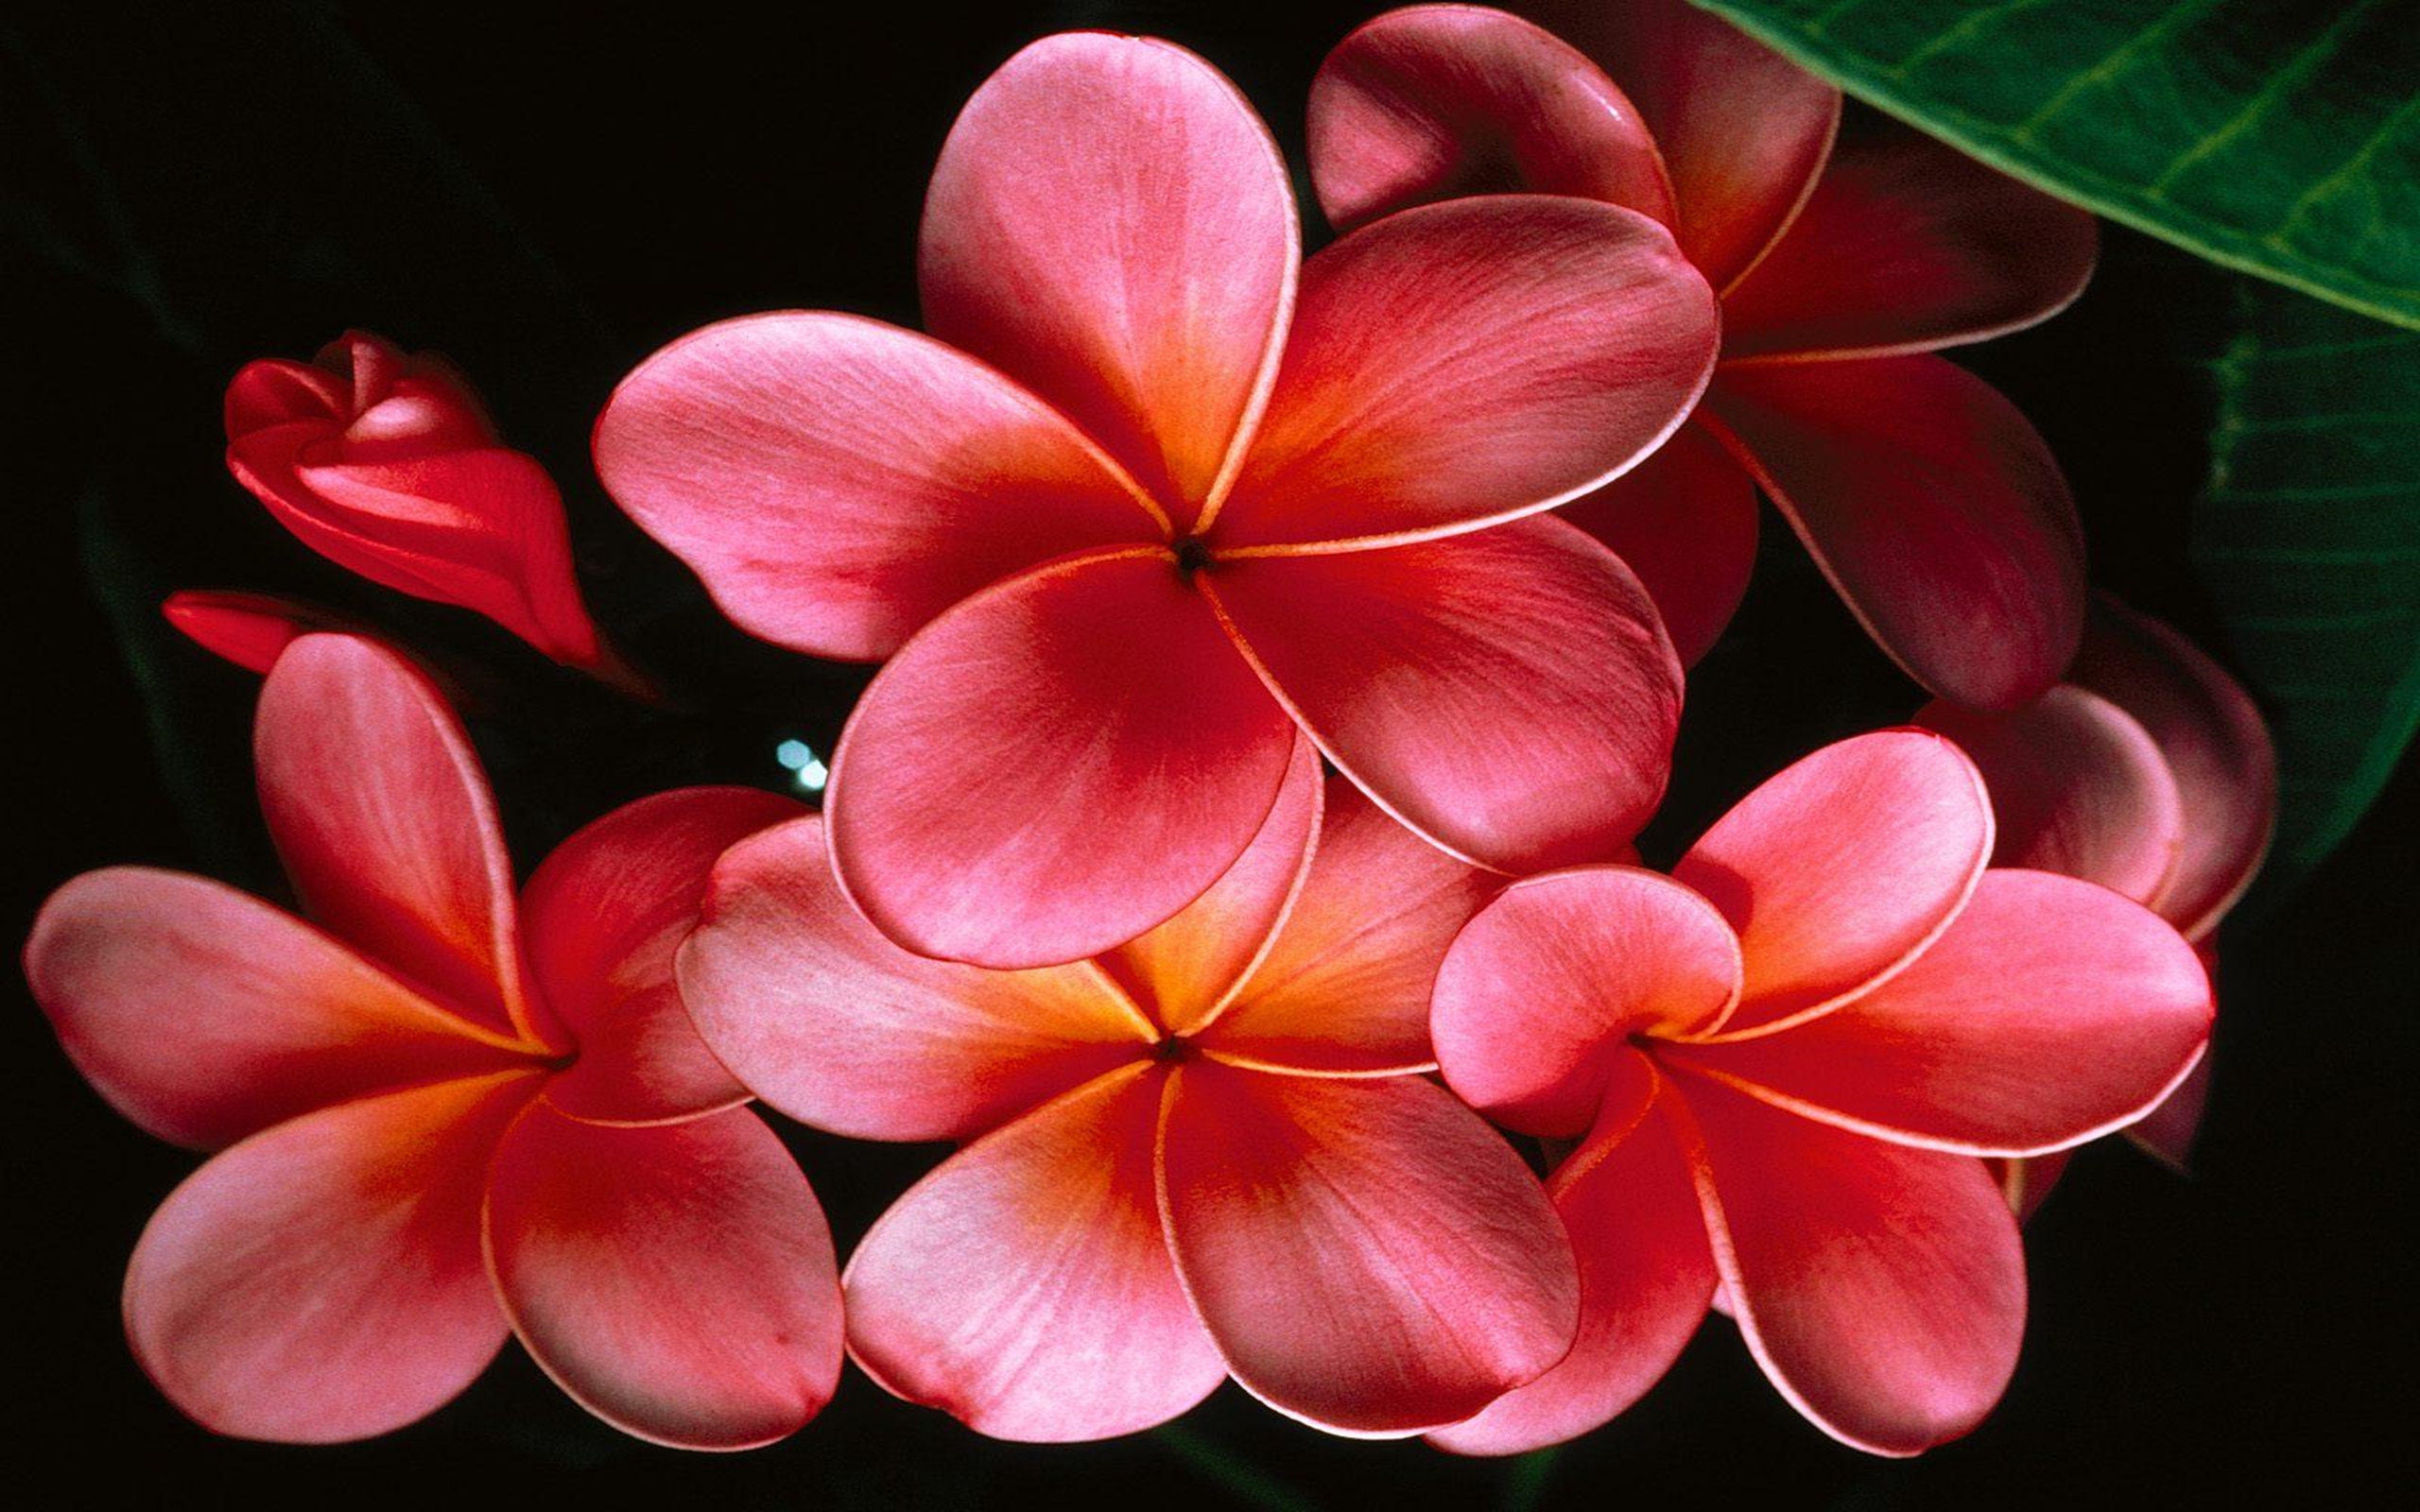 wallpaper pictures hd,petal,frangipani,flower,red,plant